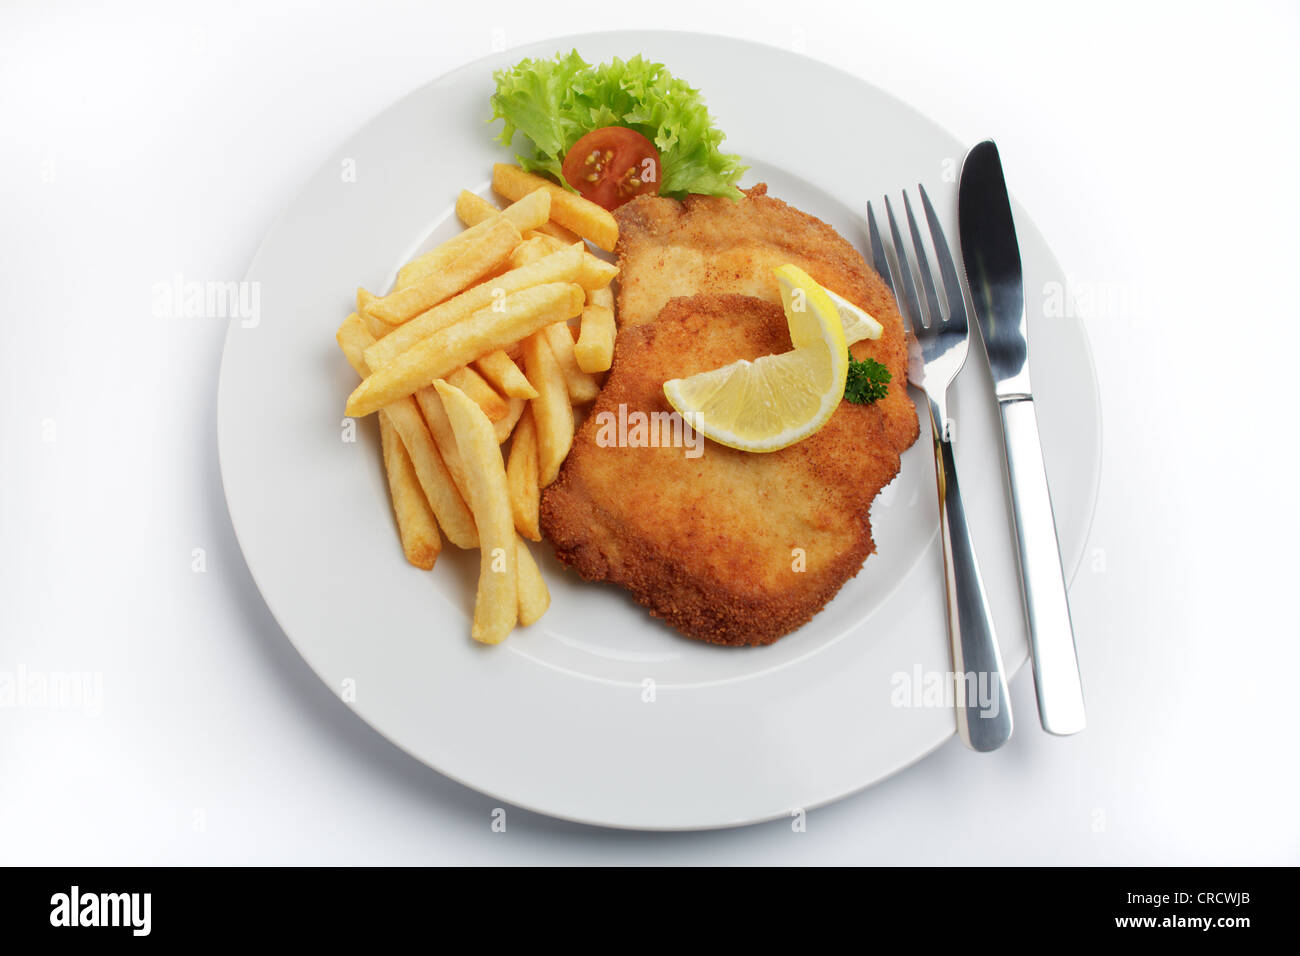 Breaded pork escalope Viennese style with lemon slice and French fries Stock Photo